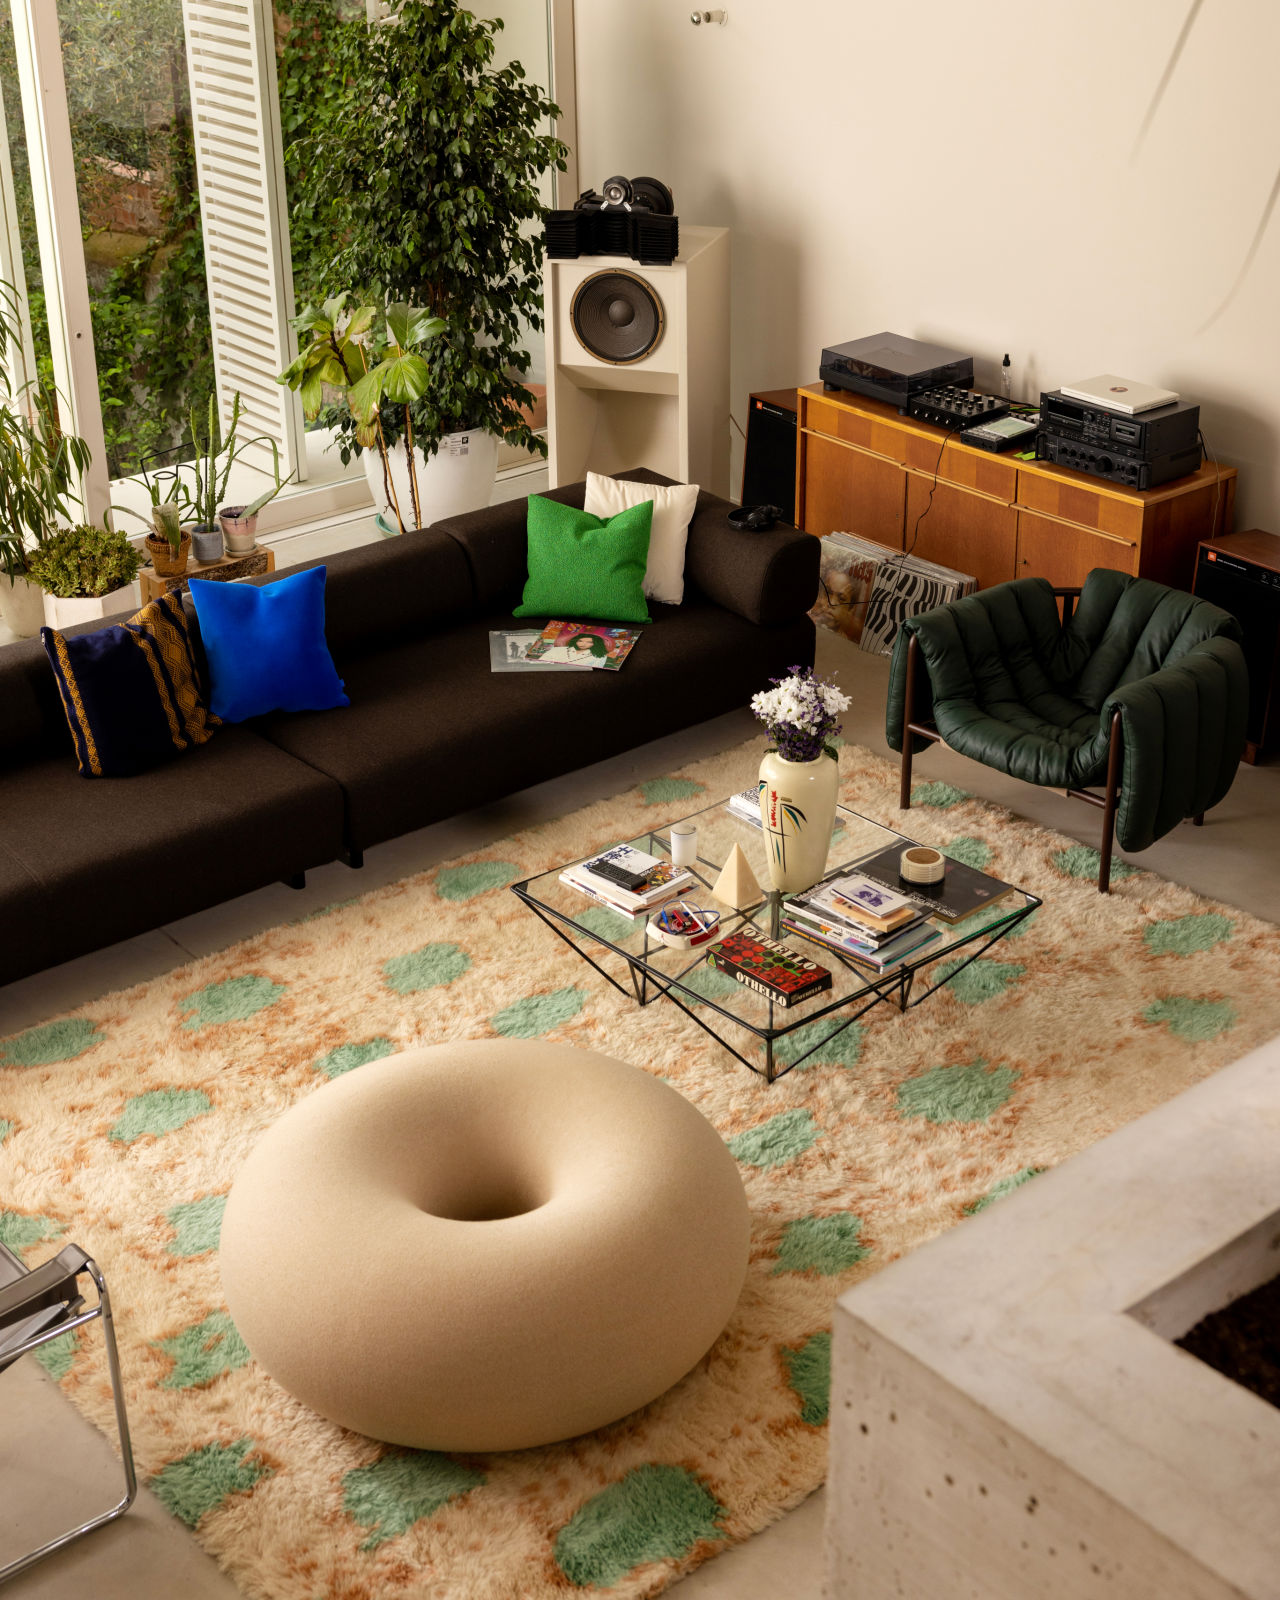 A lifestyle image of a living room/lounge scene featuring Palo Modular Sofa, Monster Rug, Boa Pouf, Velvet Cushion, Crepe Cushions, and Puffy Lounge Chair.